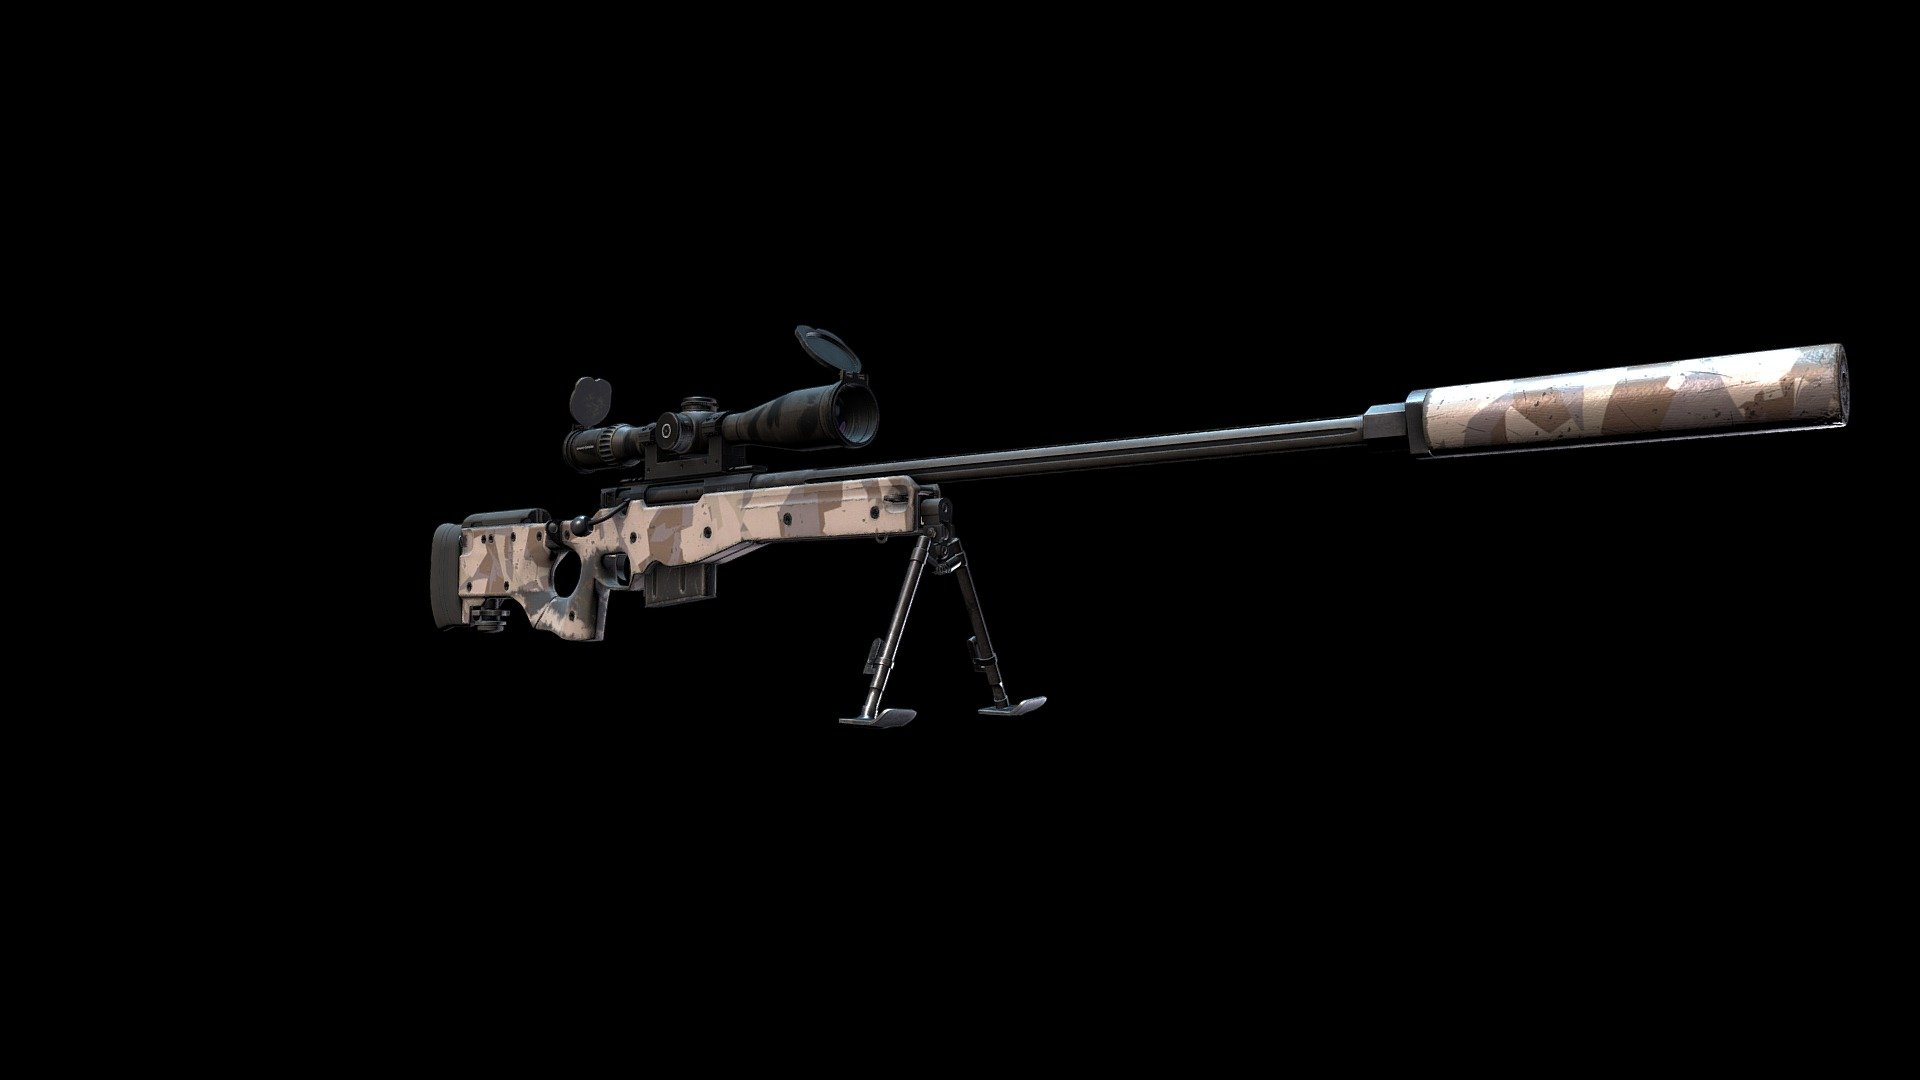 Manufactured by Accuracy international England.
Scope manufactured by Schmidt&amp;Bender.

One of the most popular sniper rifle in video games and top quality in real life. Obtained by those who need top performance and accuracy at any time.

Modeled in blender textured Substance Designer.
If have any questions you can contact me by email or comment. Email - erikasmulskis@gmail.com - Sniper Rifle L115A3 - 3D model by VIPUKS 3d model